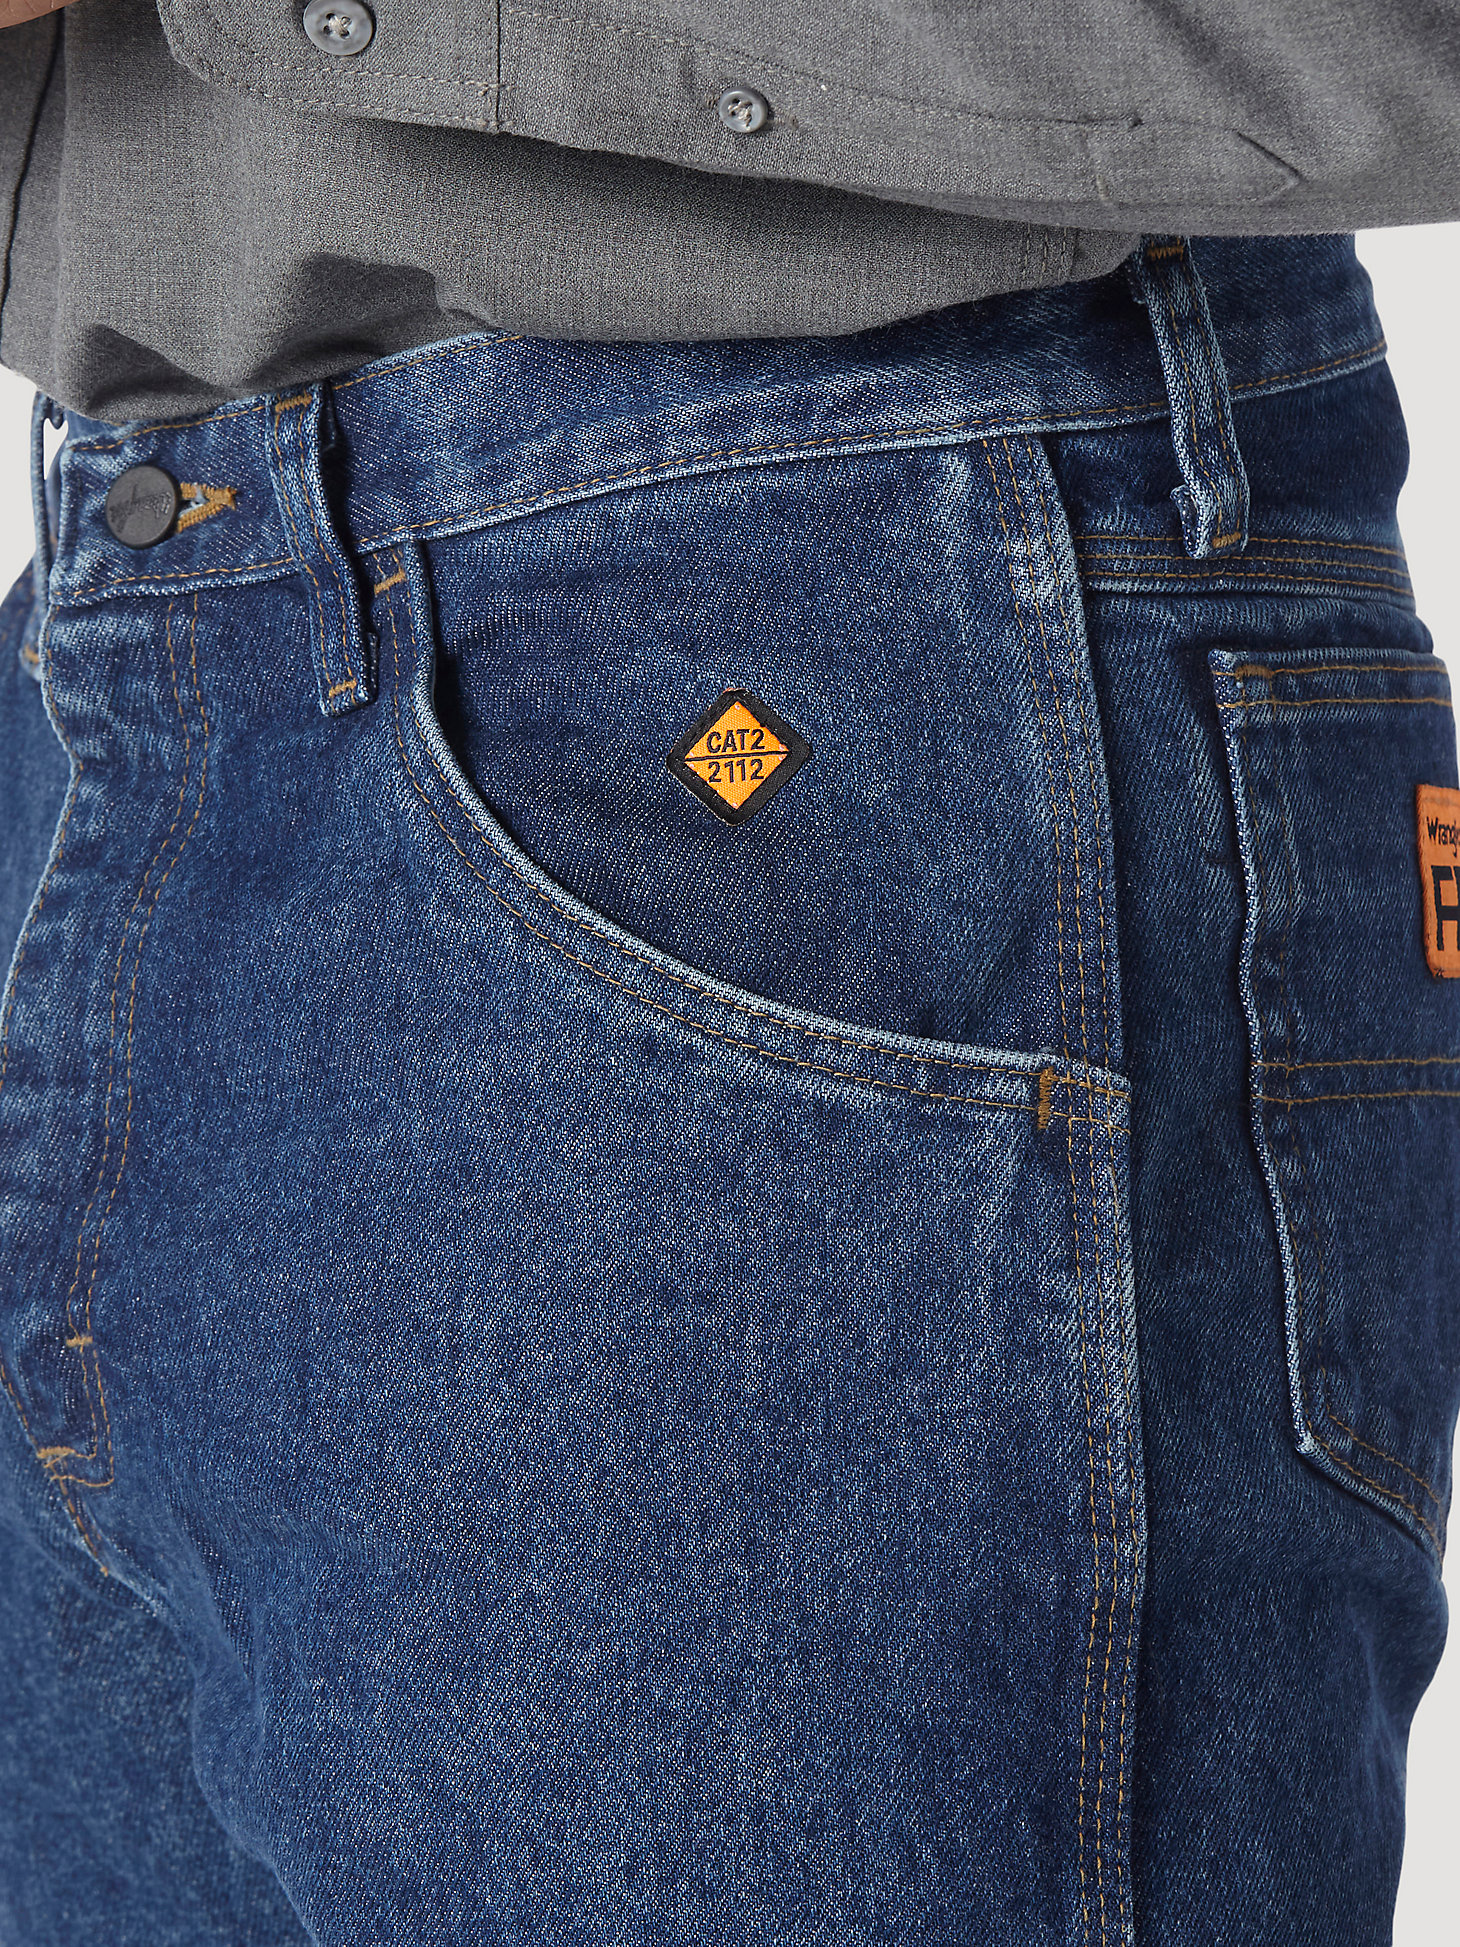 Wrangler® RIGGS Workwear® FR Flame Resistant Relaxed Fit Jean in FLAME RESISTANT alternative view 6